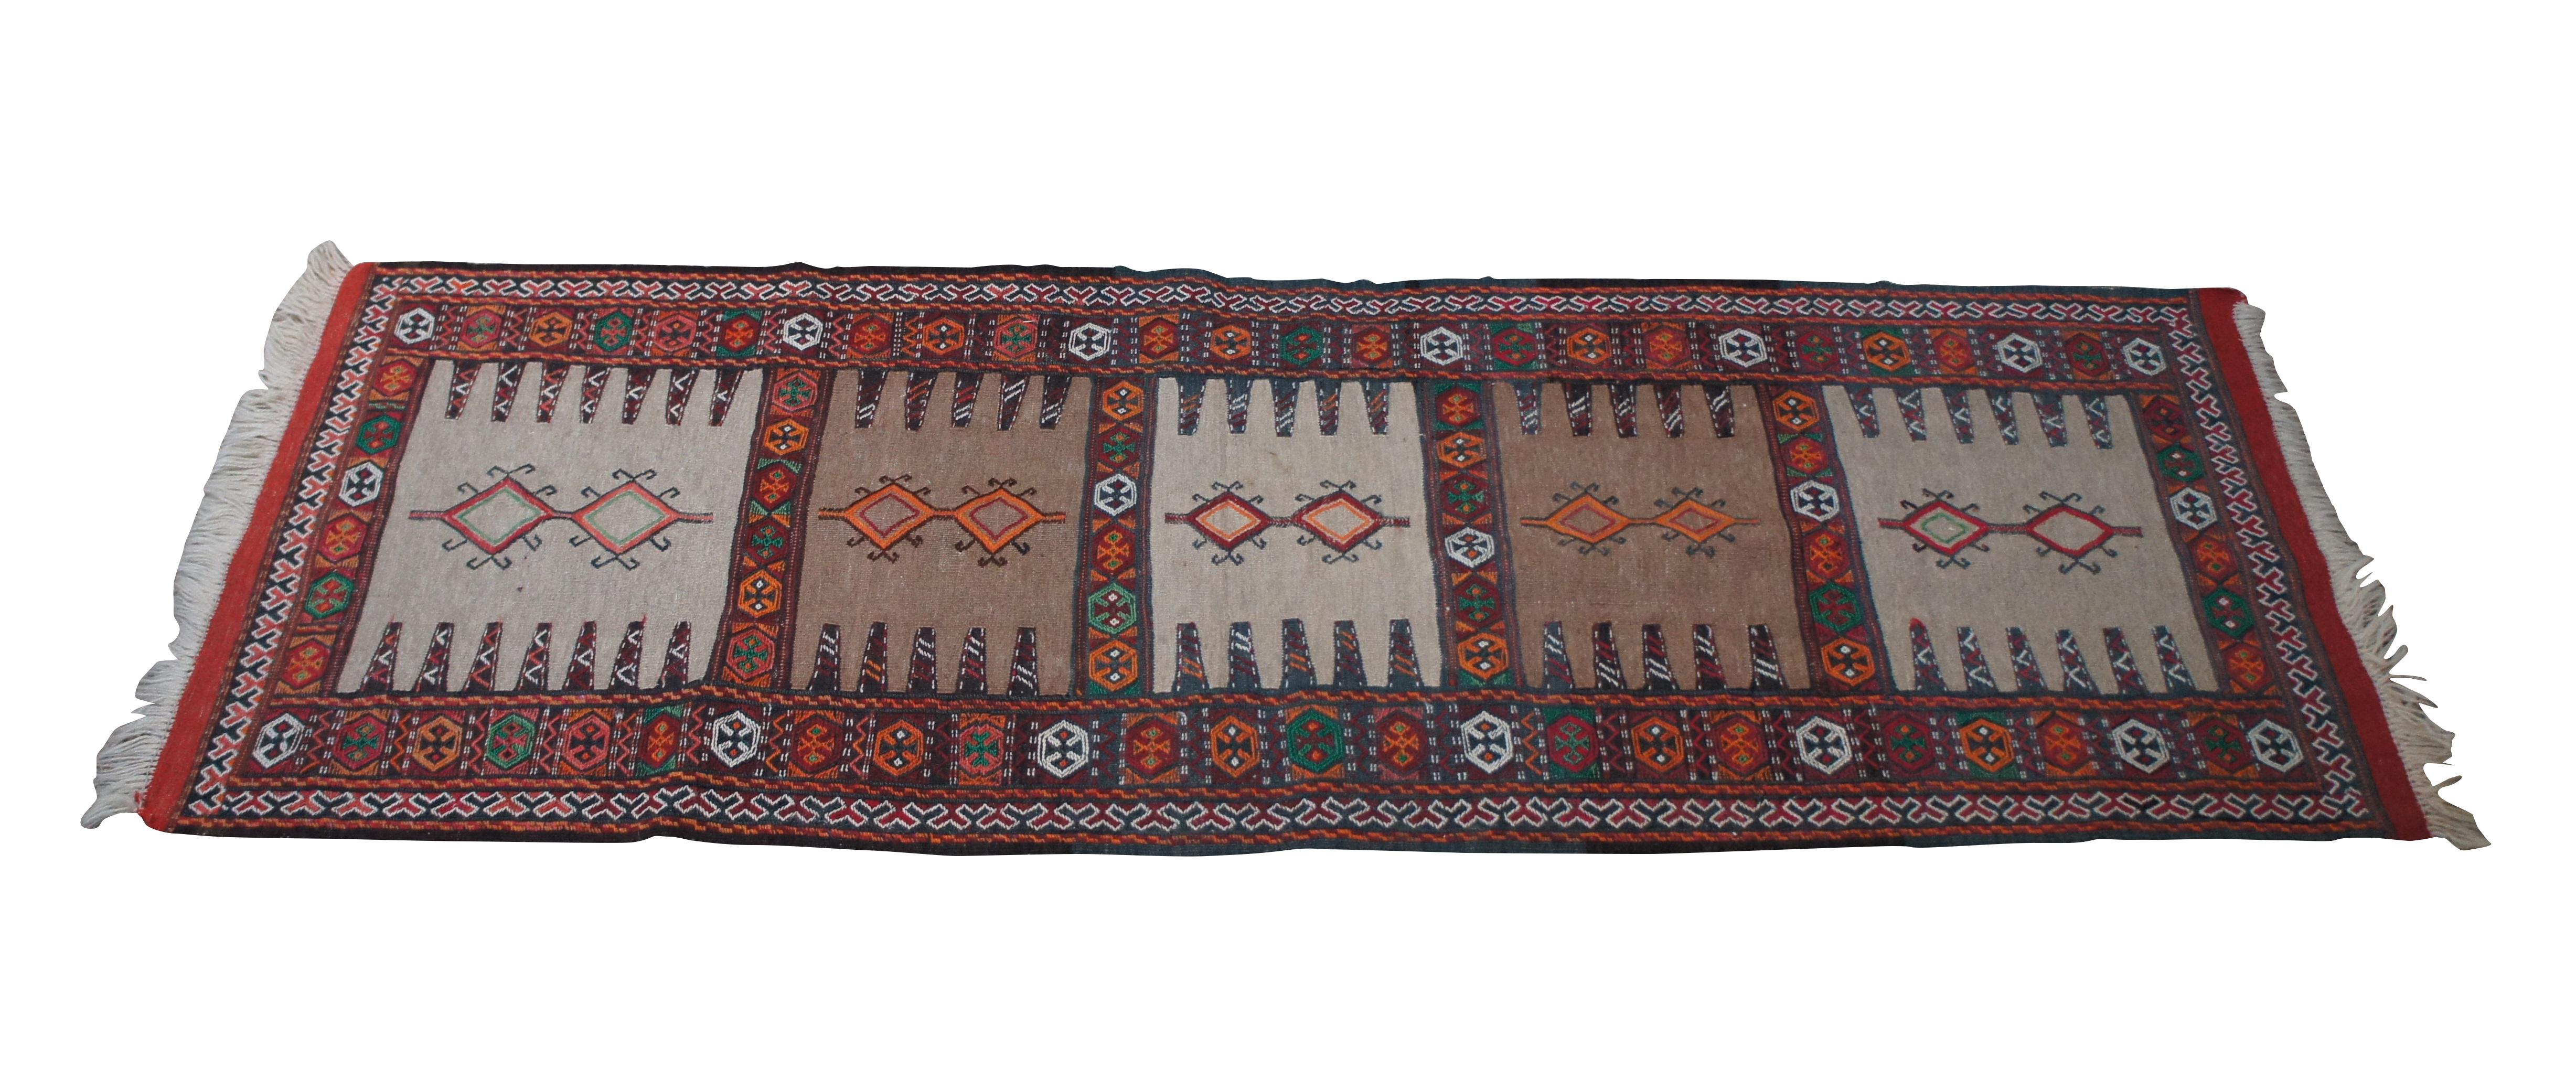 Vintage Jajim Ghoochan hand woven rug runner featuring geometric design with reds, green, orange, blues, tans and white.  Made for Shiraz Rug Gallery of California.

74” x 25.5” / 2.2’ x 6.3’ (Length x Width)
